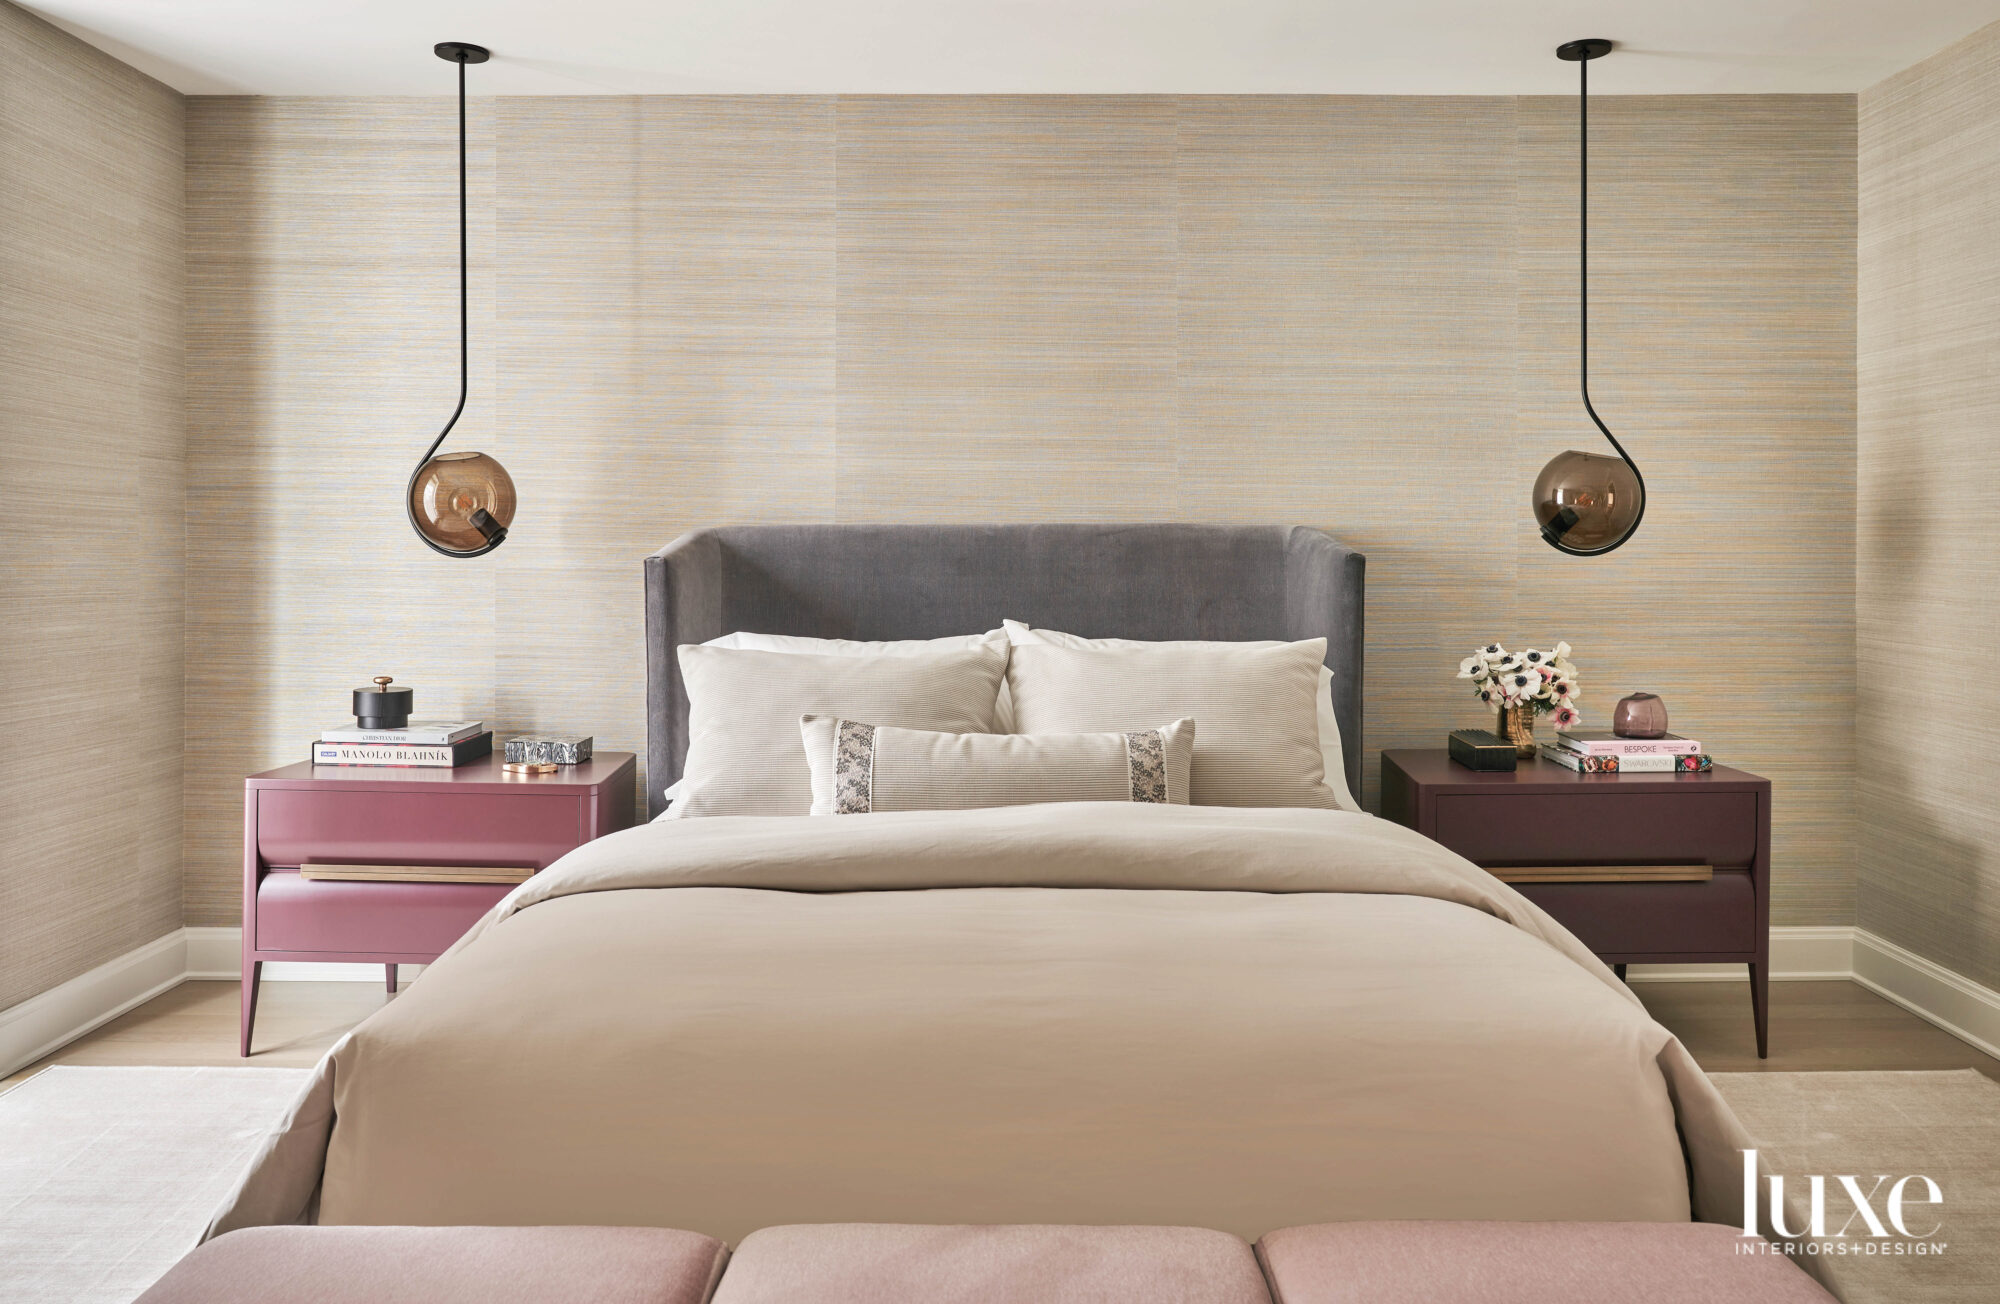 A bedroom with tan striped wallpaper, pink nightstands and a gray bed with tan linens.